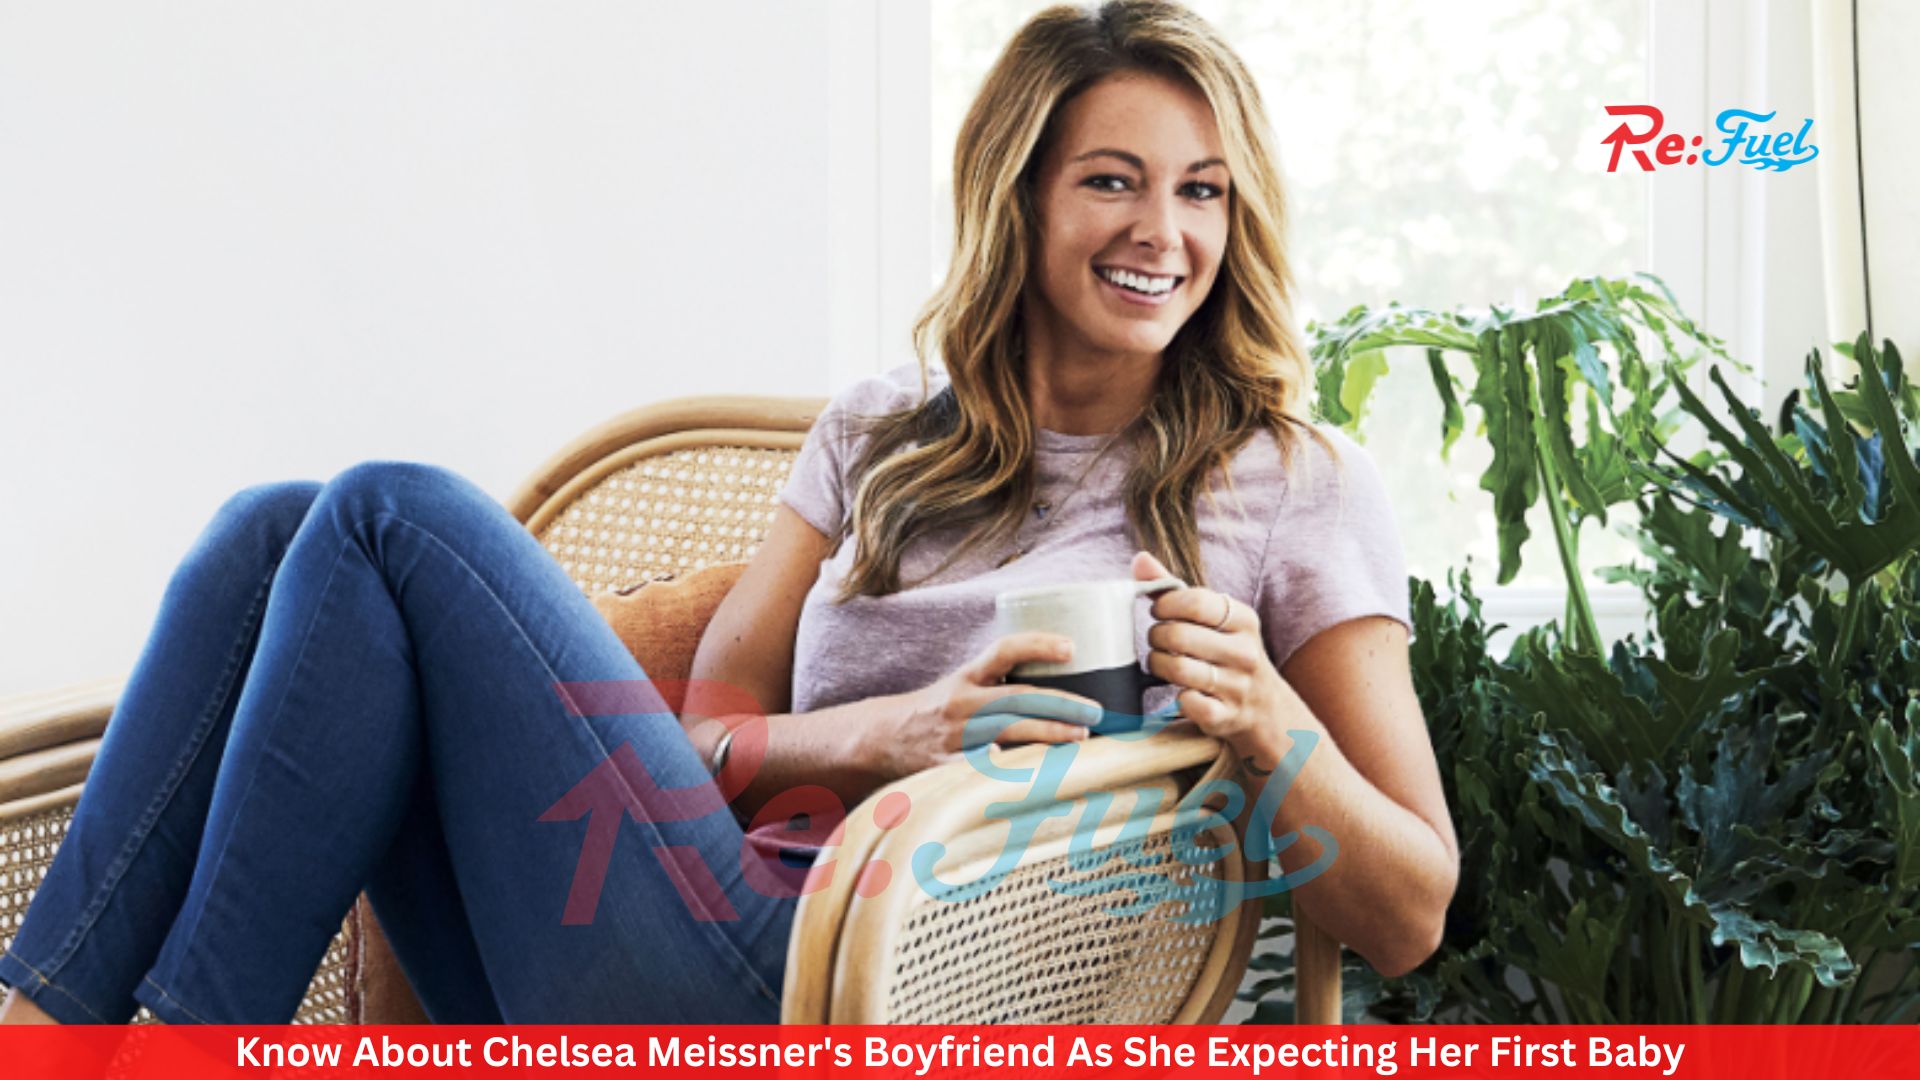 Know About Chelsea Meissner's Boyfriend As She Expecting Her First Baby